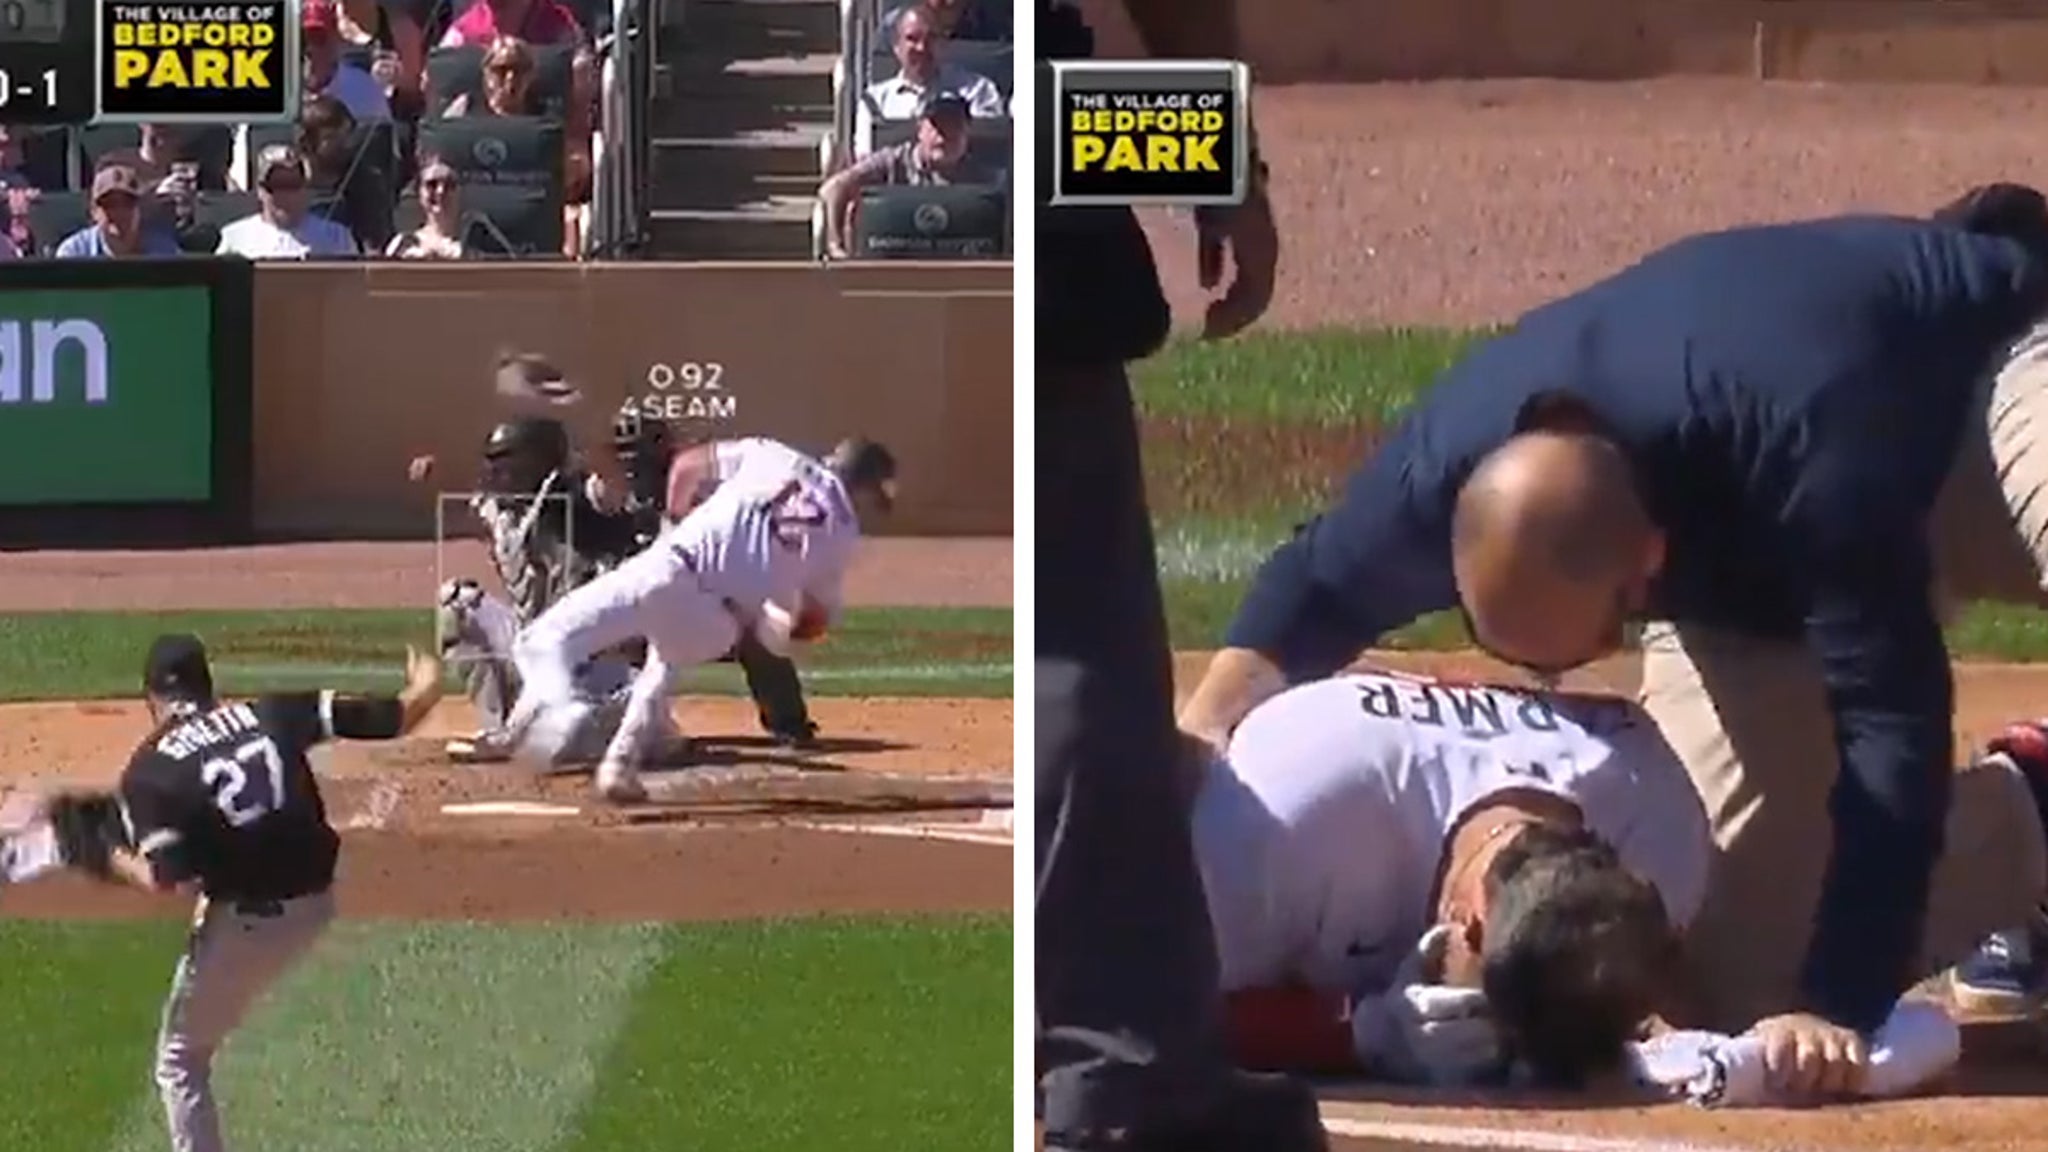 Horrifying Video of Kyle Farmer Getting Struck by 92 MPH Pitch Goes Viral